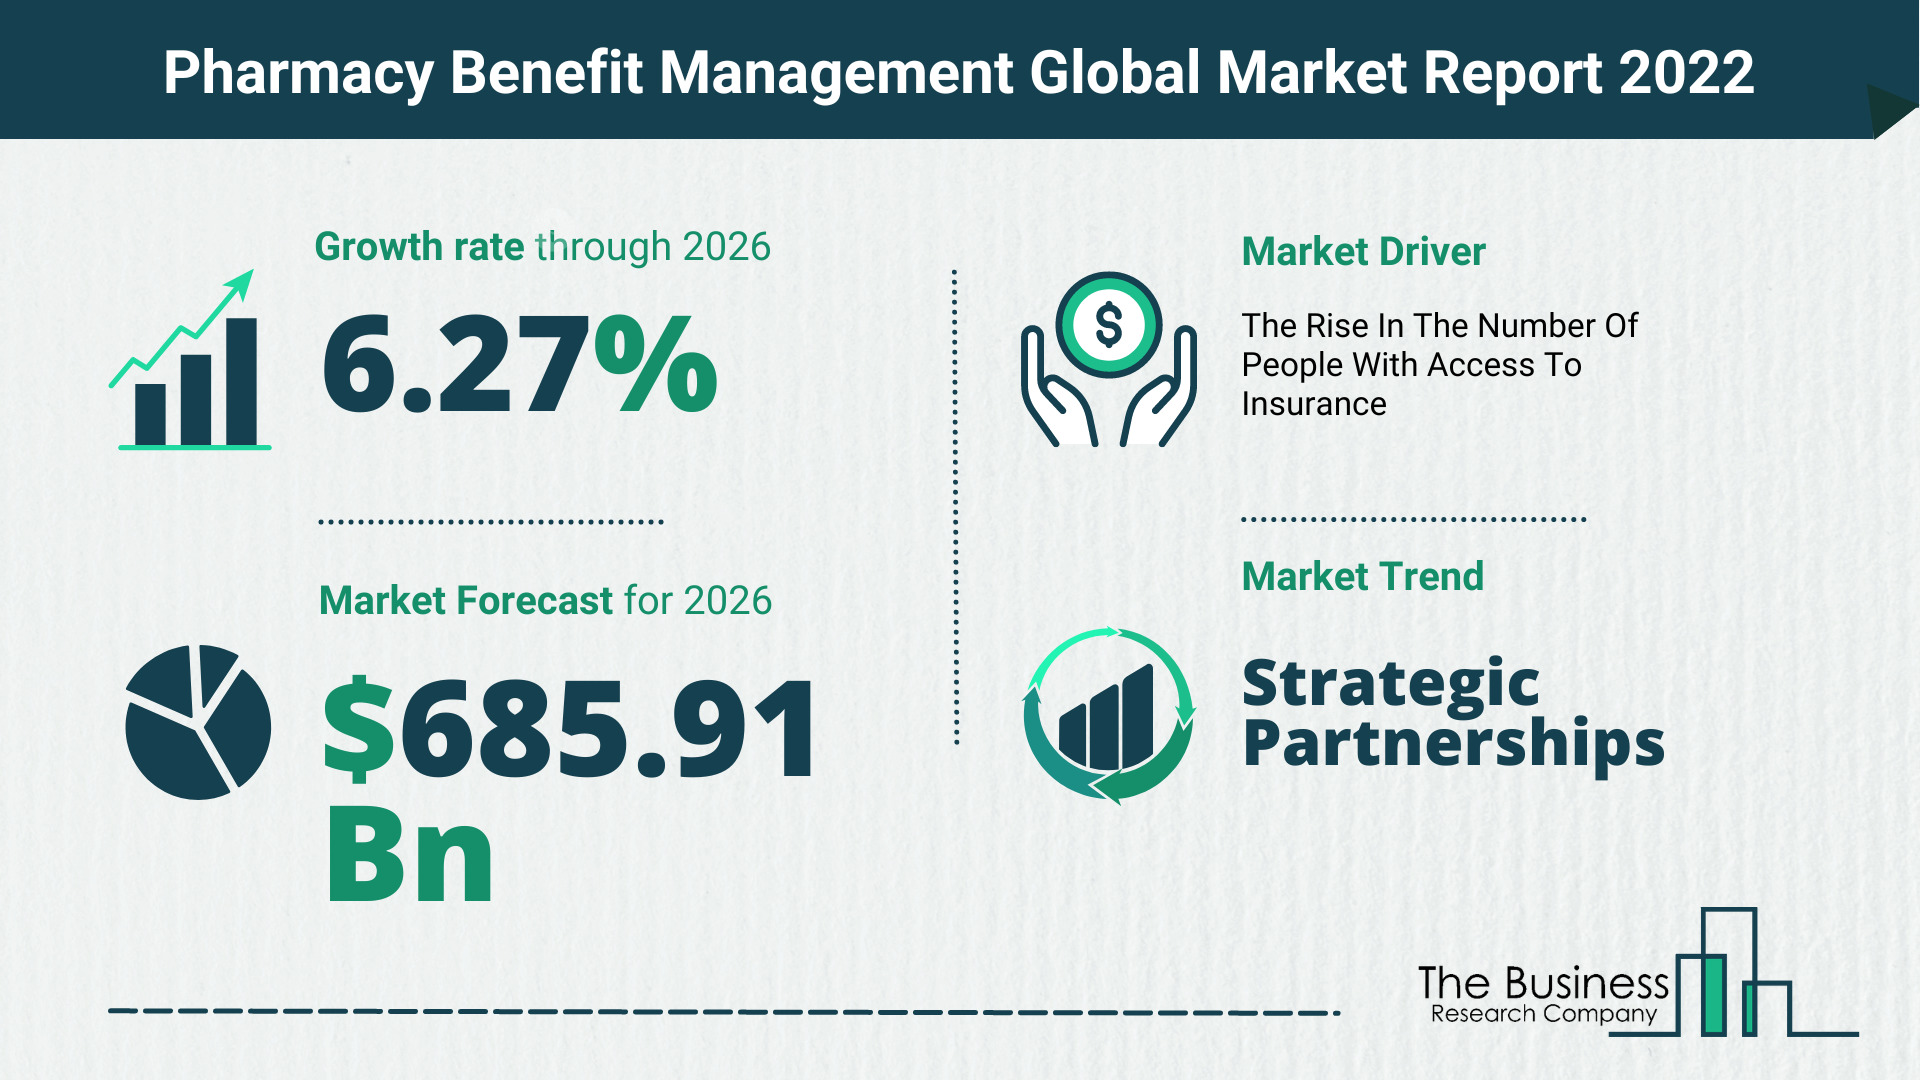 Global Pharmacy Benefit Management Market 2022 – Market Opportunities And Strategies